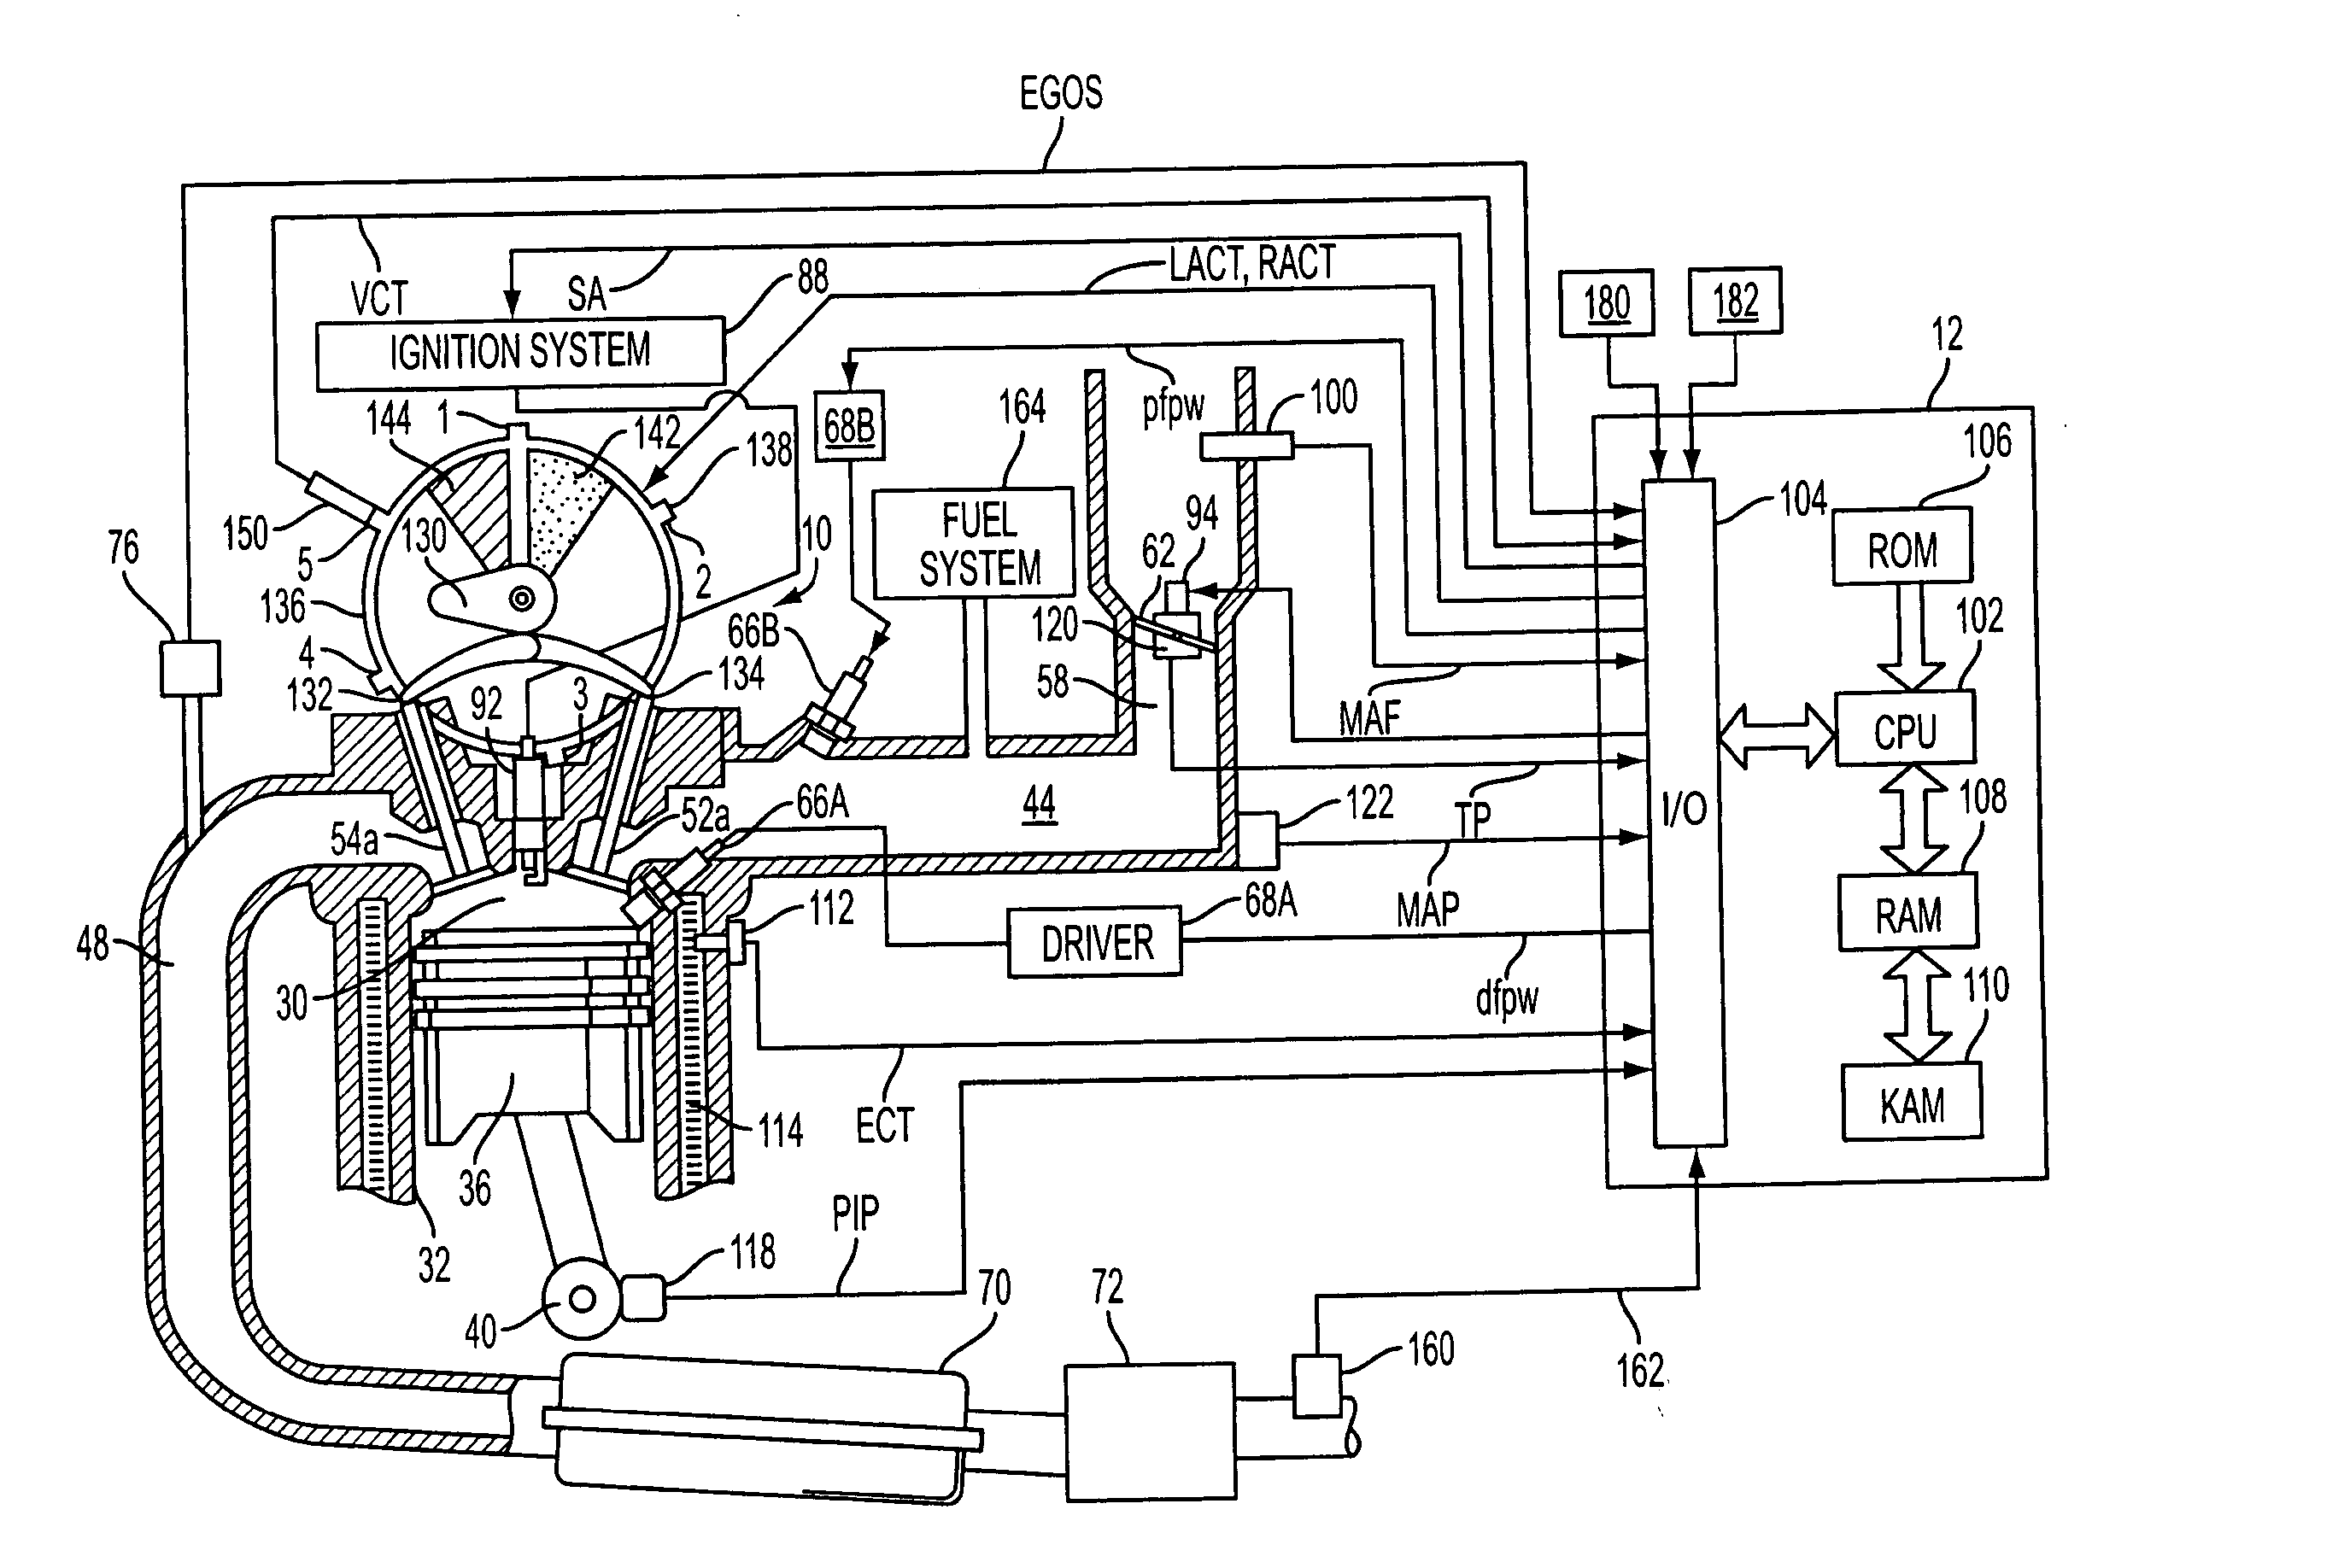 Control of peak engine output in an engine with a knock suppression fluid